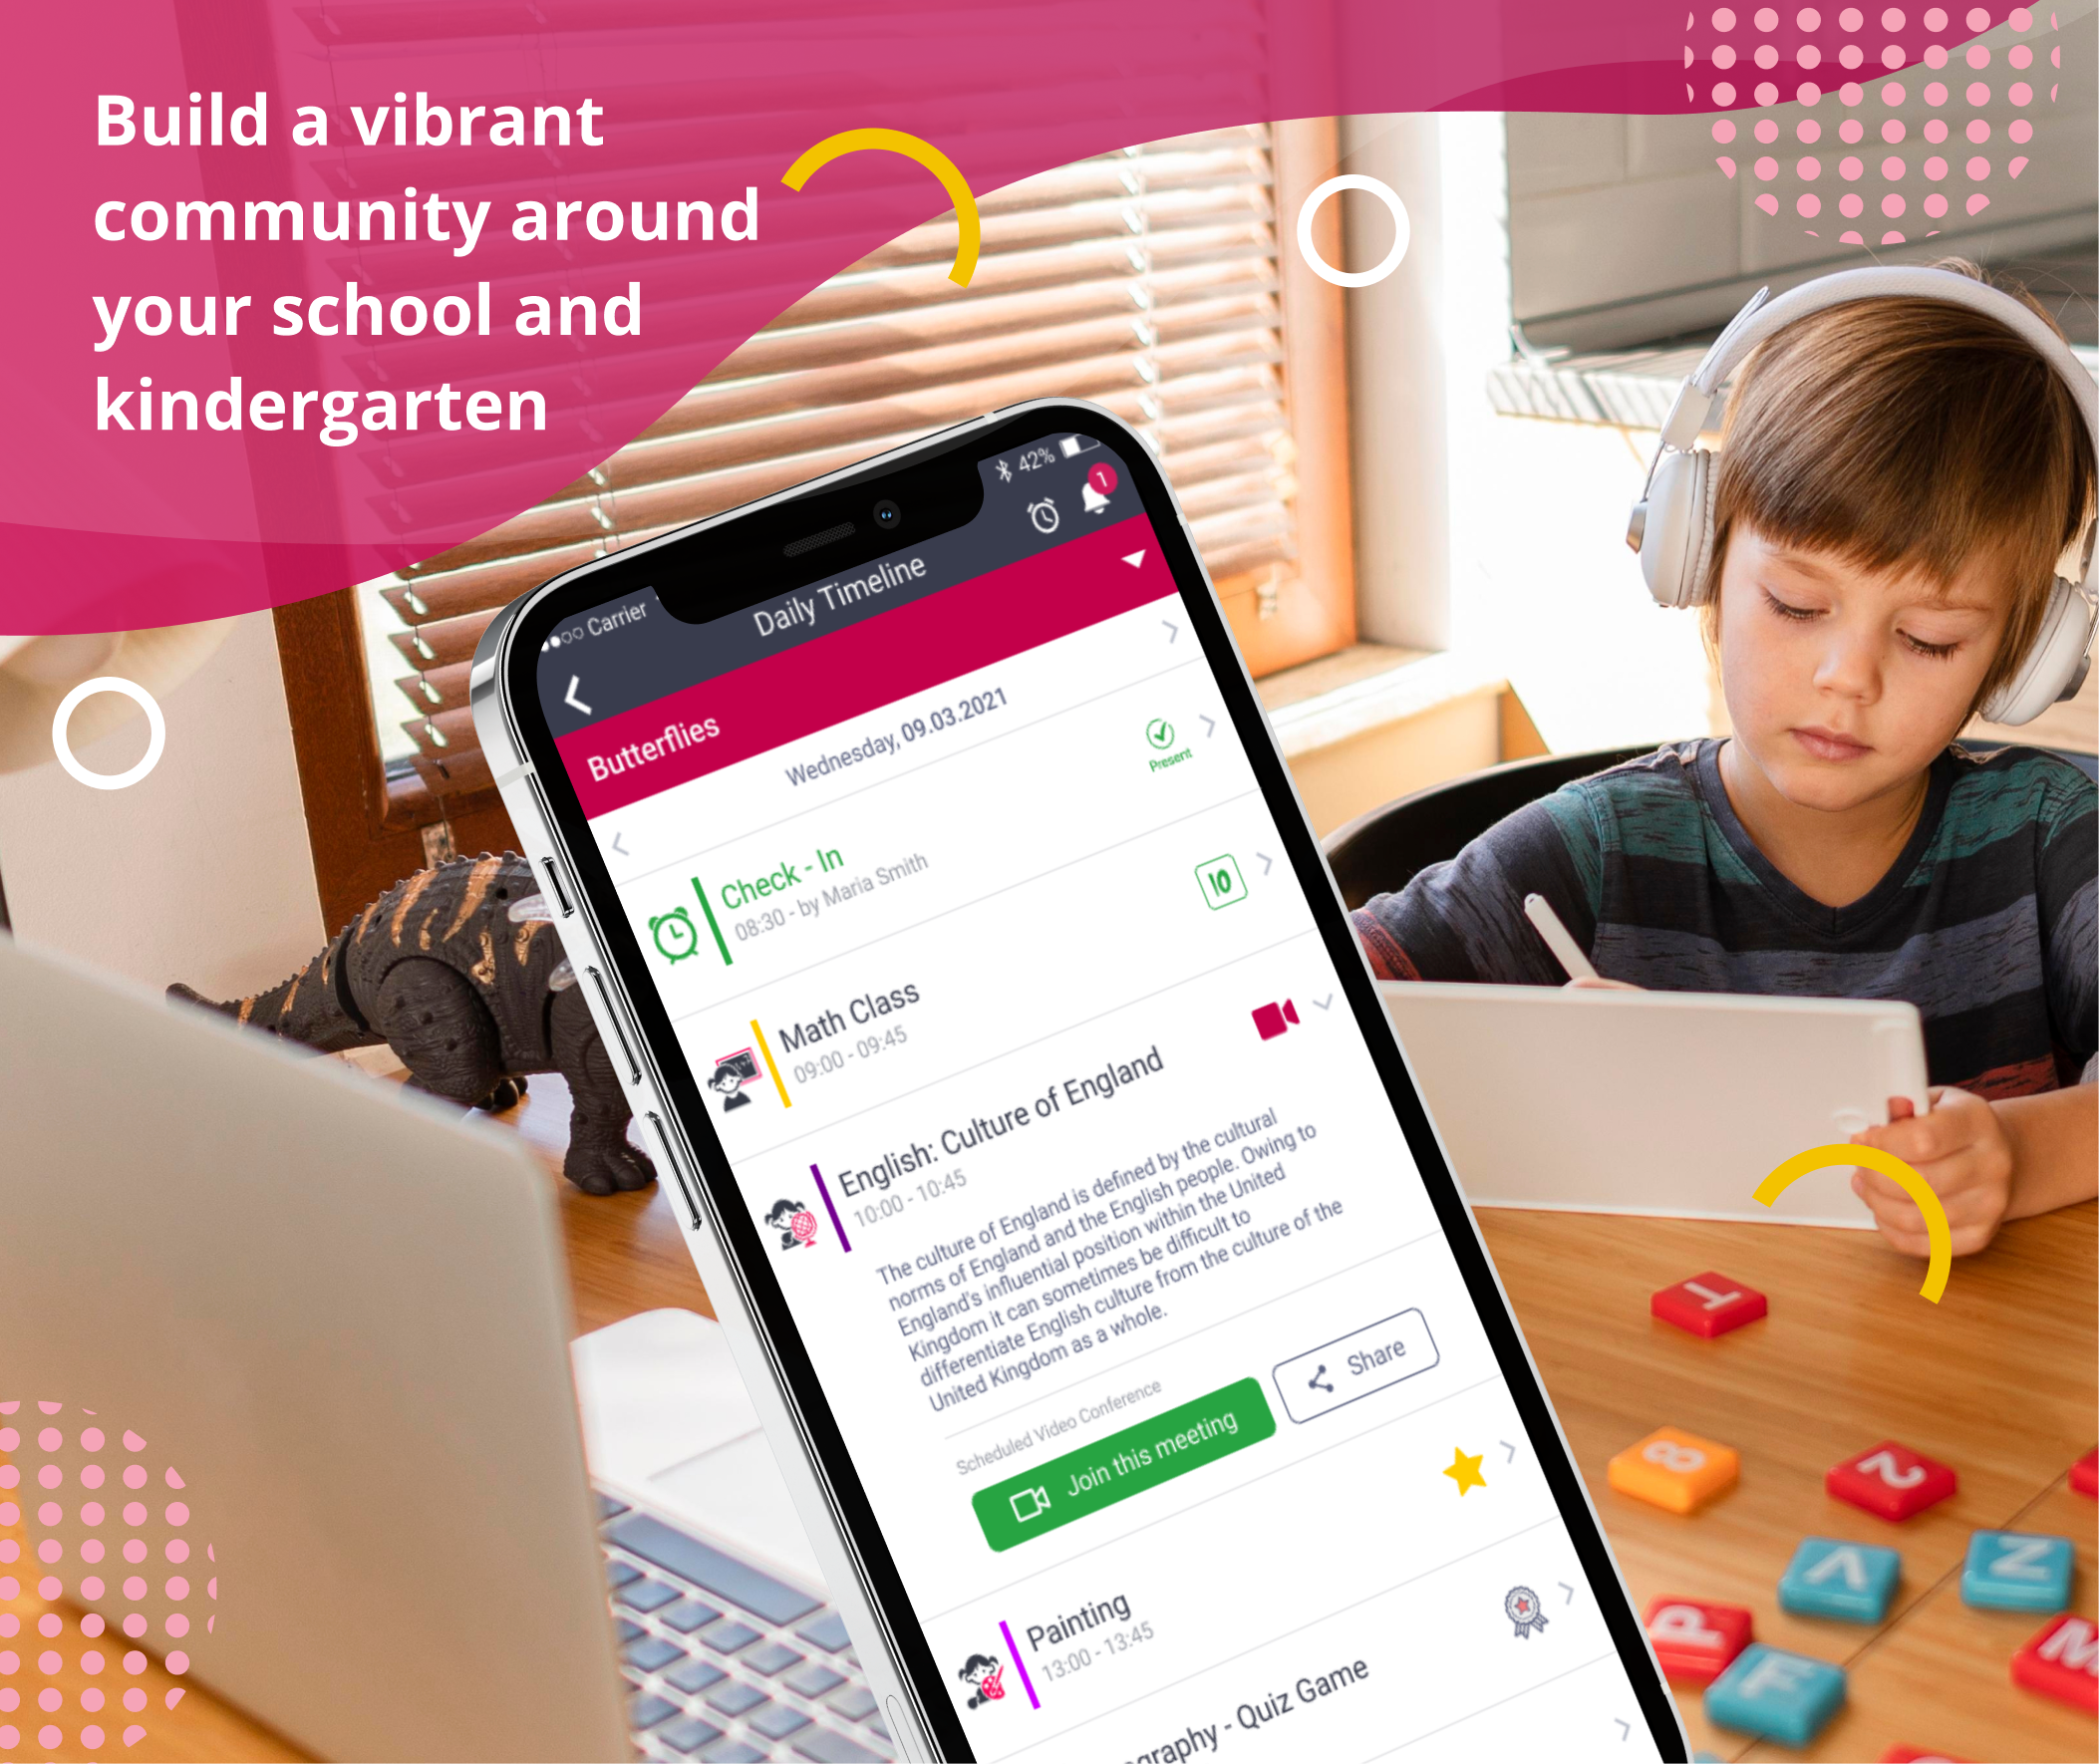 KINDERPEDIA Software - Kinderpedia's daily timeline allows students and parents to obtain an instant snapshot of their daily schedule, as well as their tasks and results. For younger children, the app shows how much they are, slept and how they engaged in daily activities.